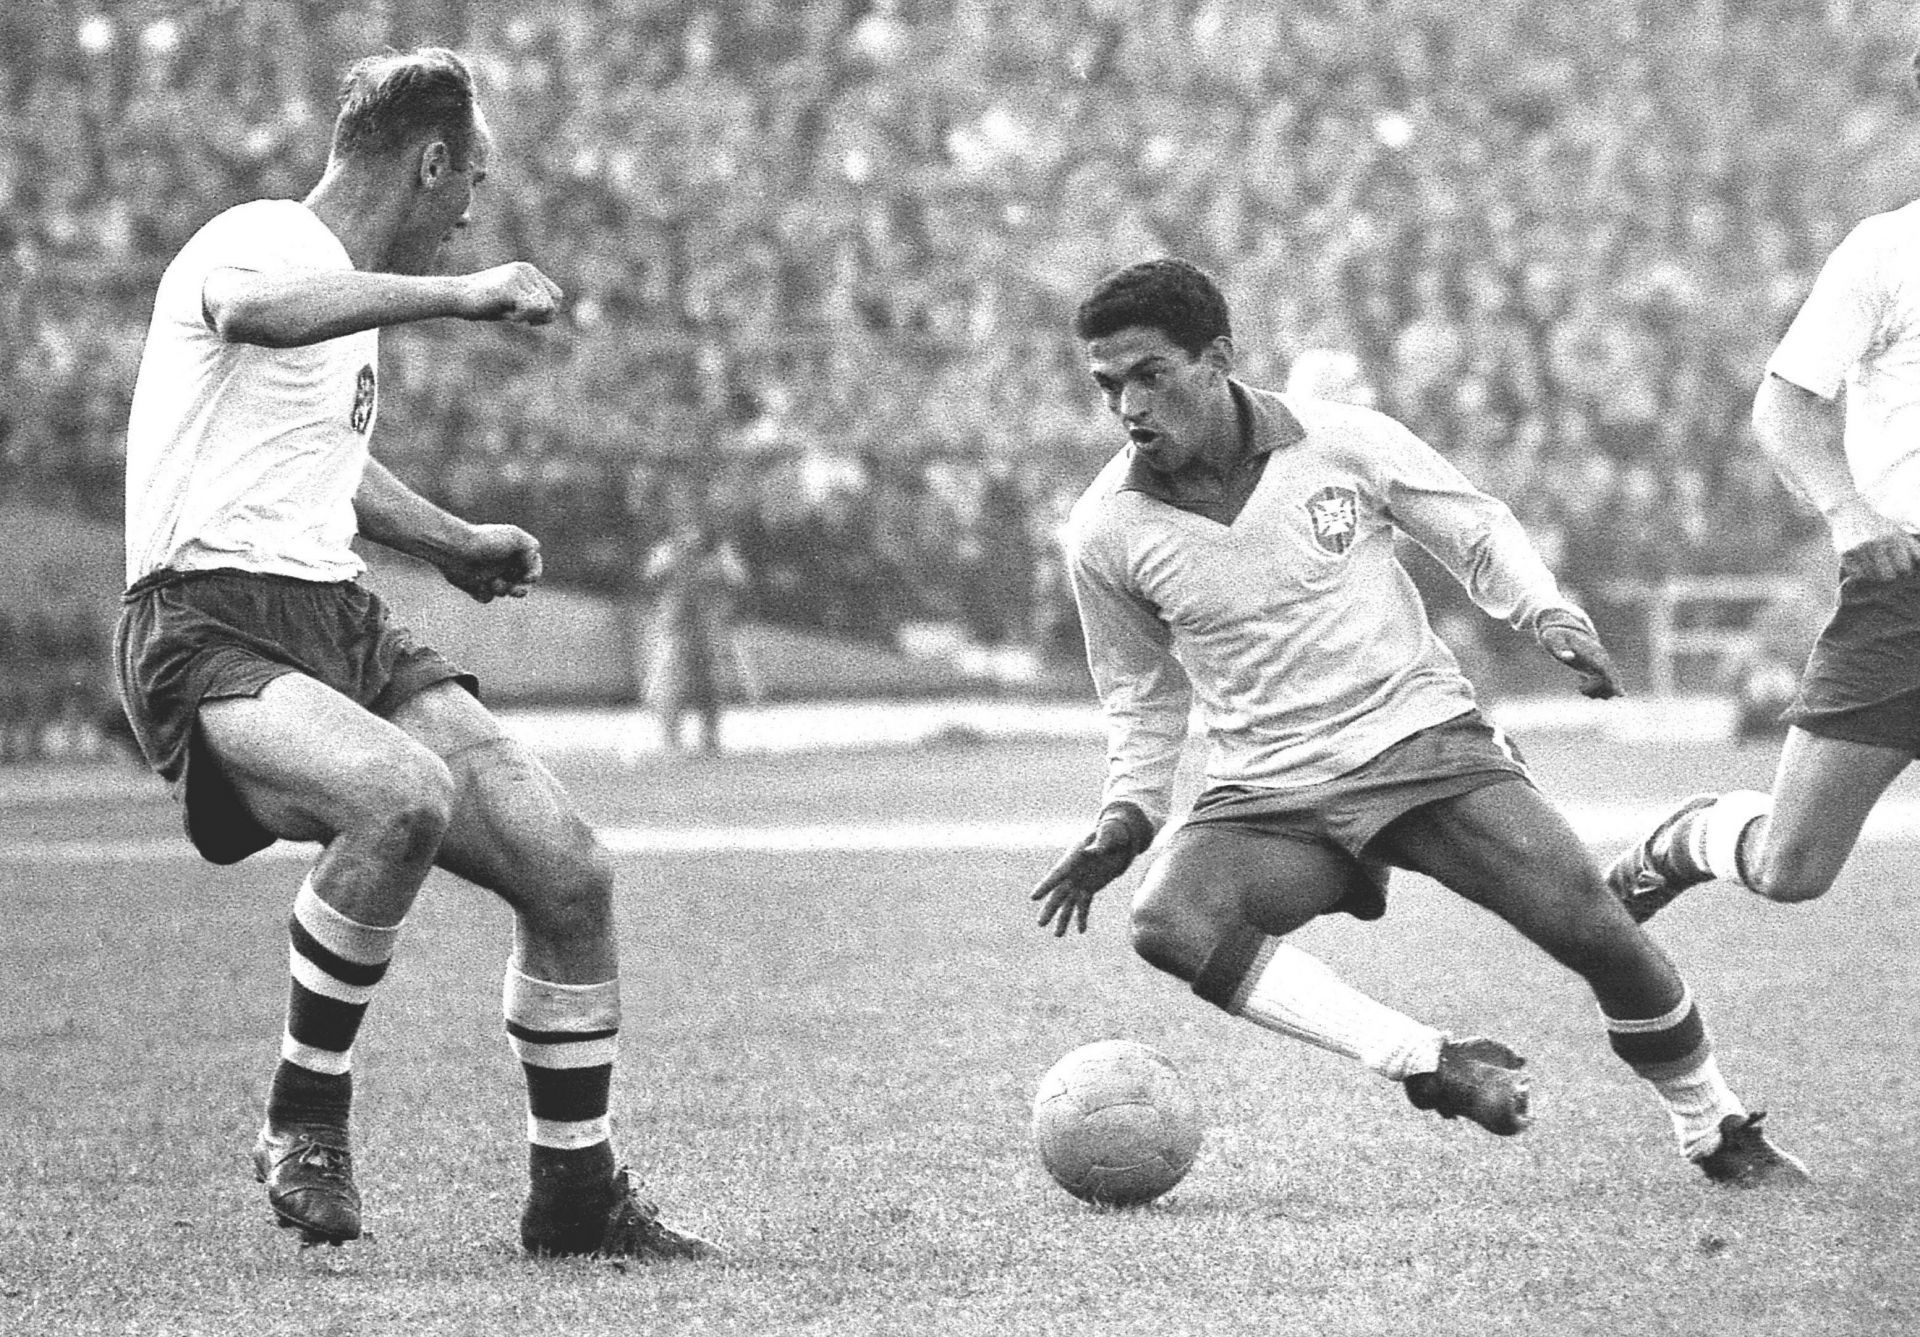 Garrincha was one of the most technically gifted players of his time